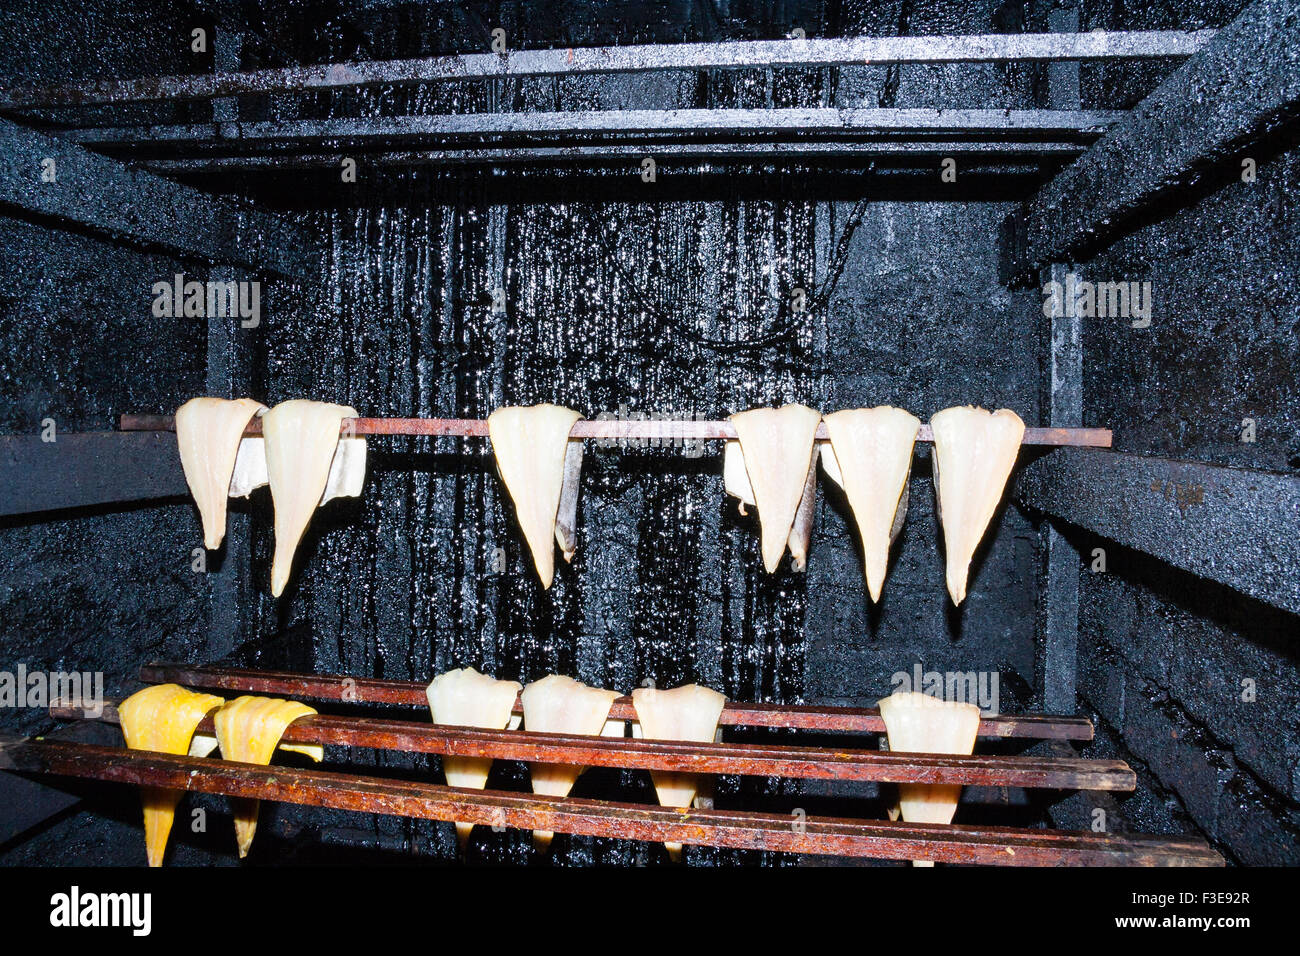 Interior of smoking oven with row of white fish fillets hanging over metal bars while being smoked. Back of over thick with black deposits. Stock Photo